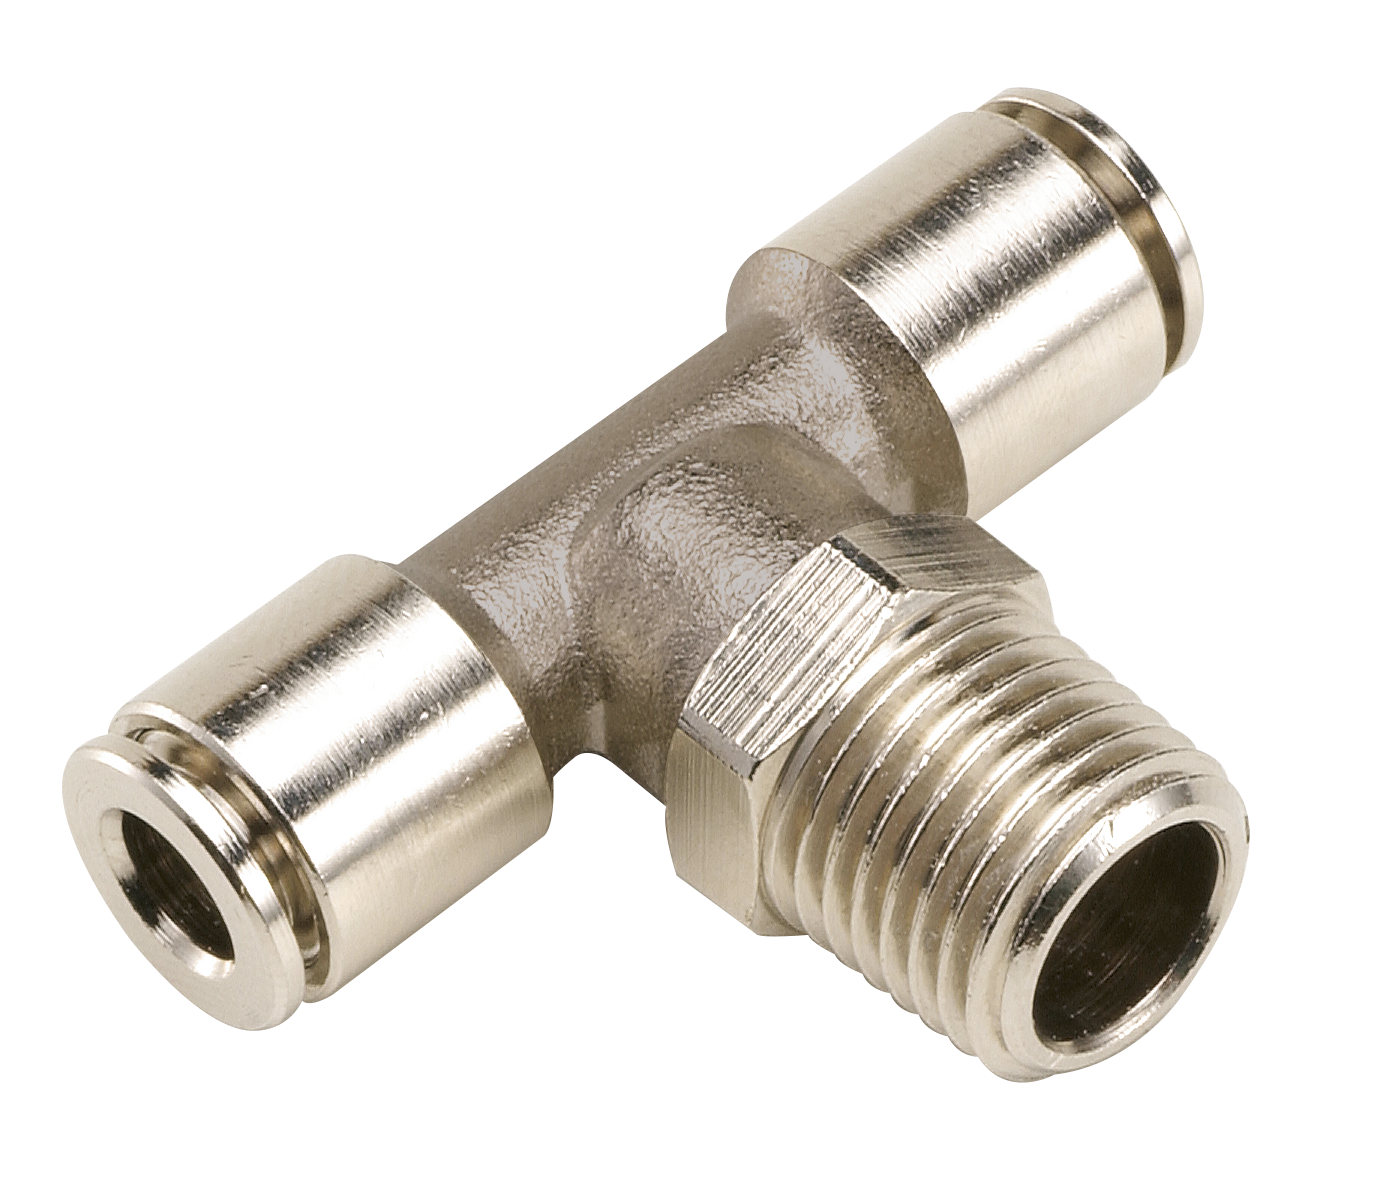 Implantation’s fittings SWIVEL CENTRAL BRANCH T MALE FITTING, TAPER Fittings and quick-connect couplings